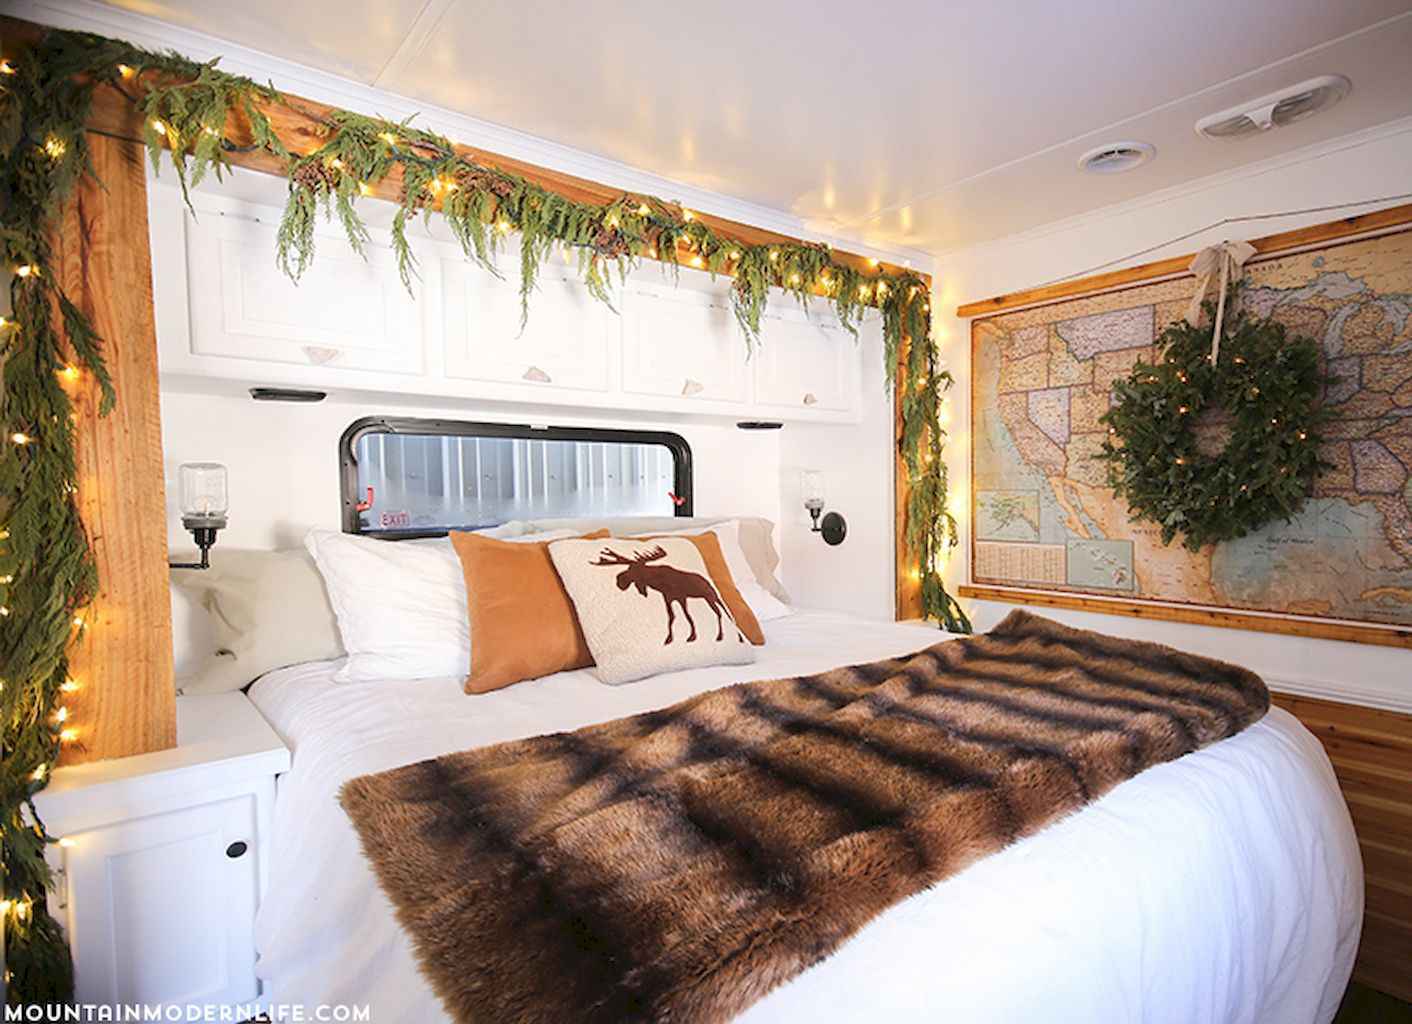 20-Awesome-RV-Campers-Christmas-Decorati